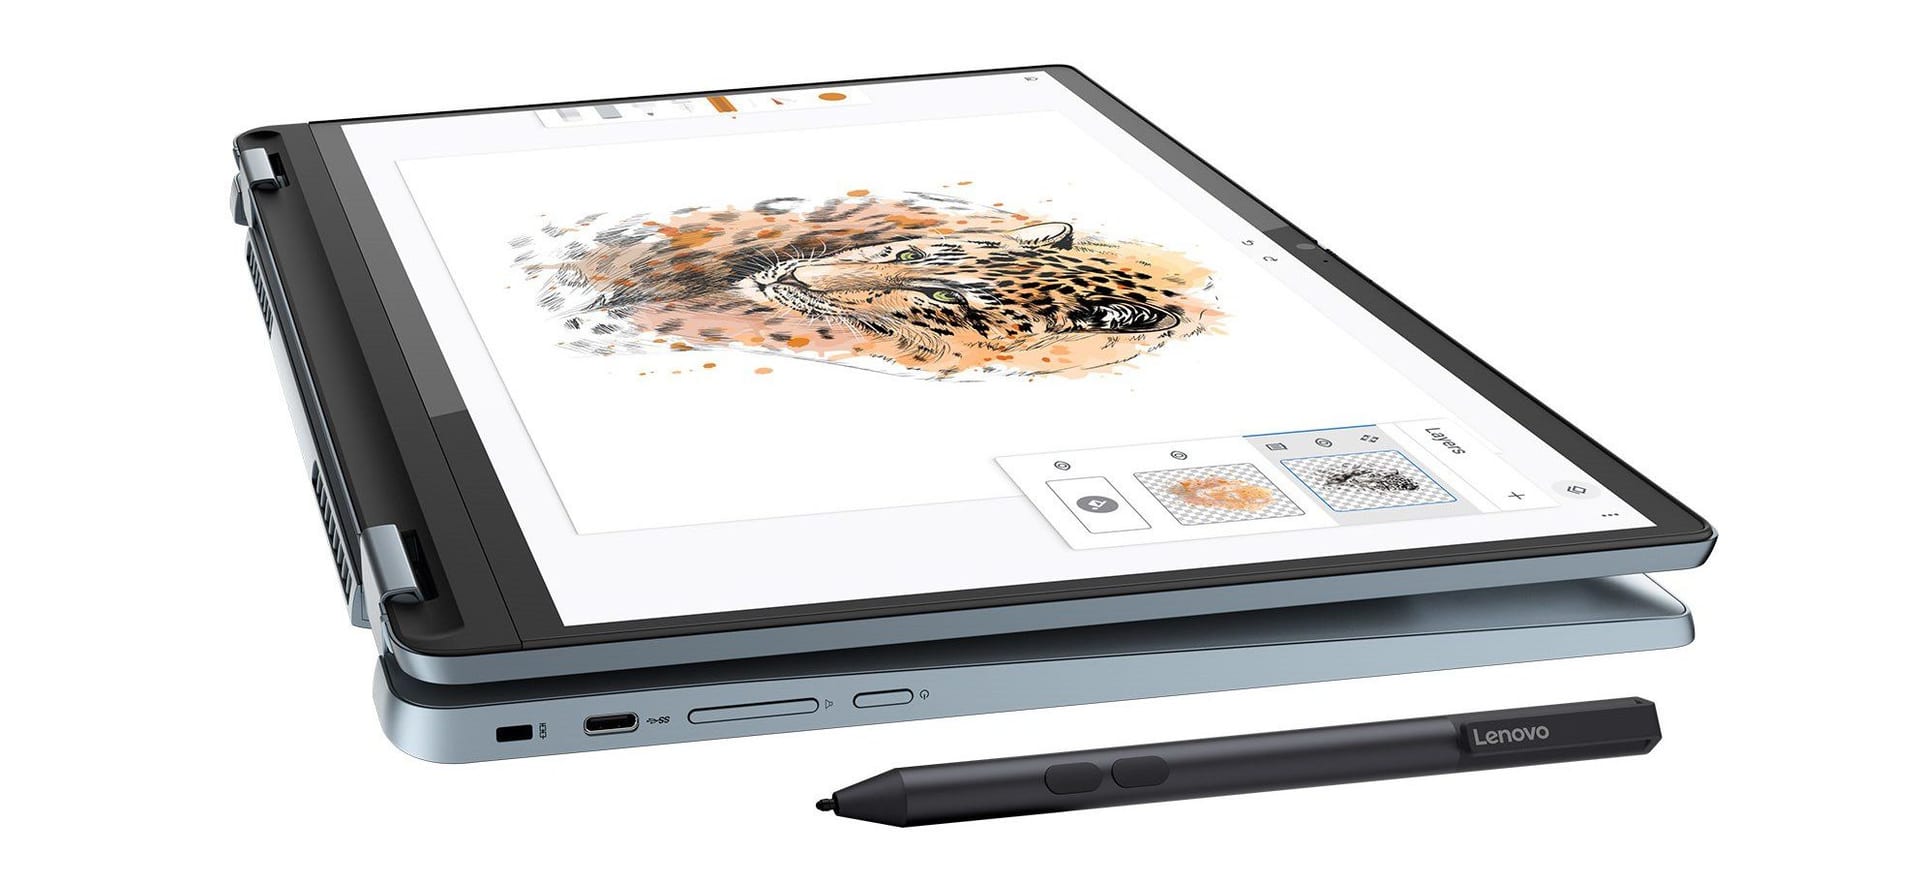 Lenovo launched a new lineup of 2-in-1 convertible and detachable laptops, a tablet, and smart solutions aimed at mainstream consumers -